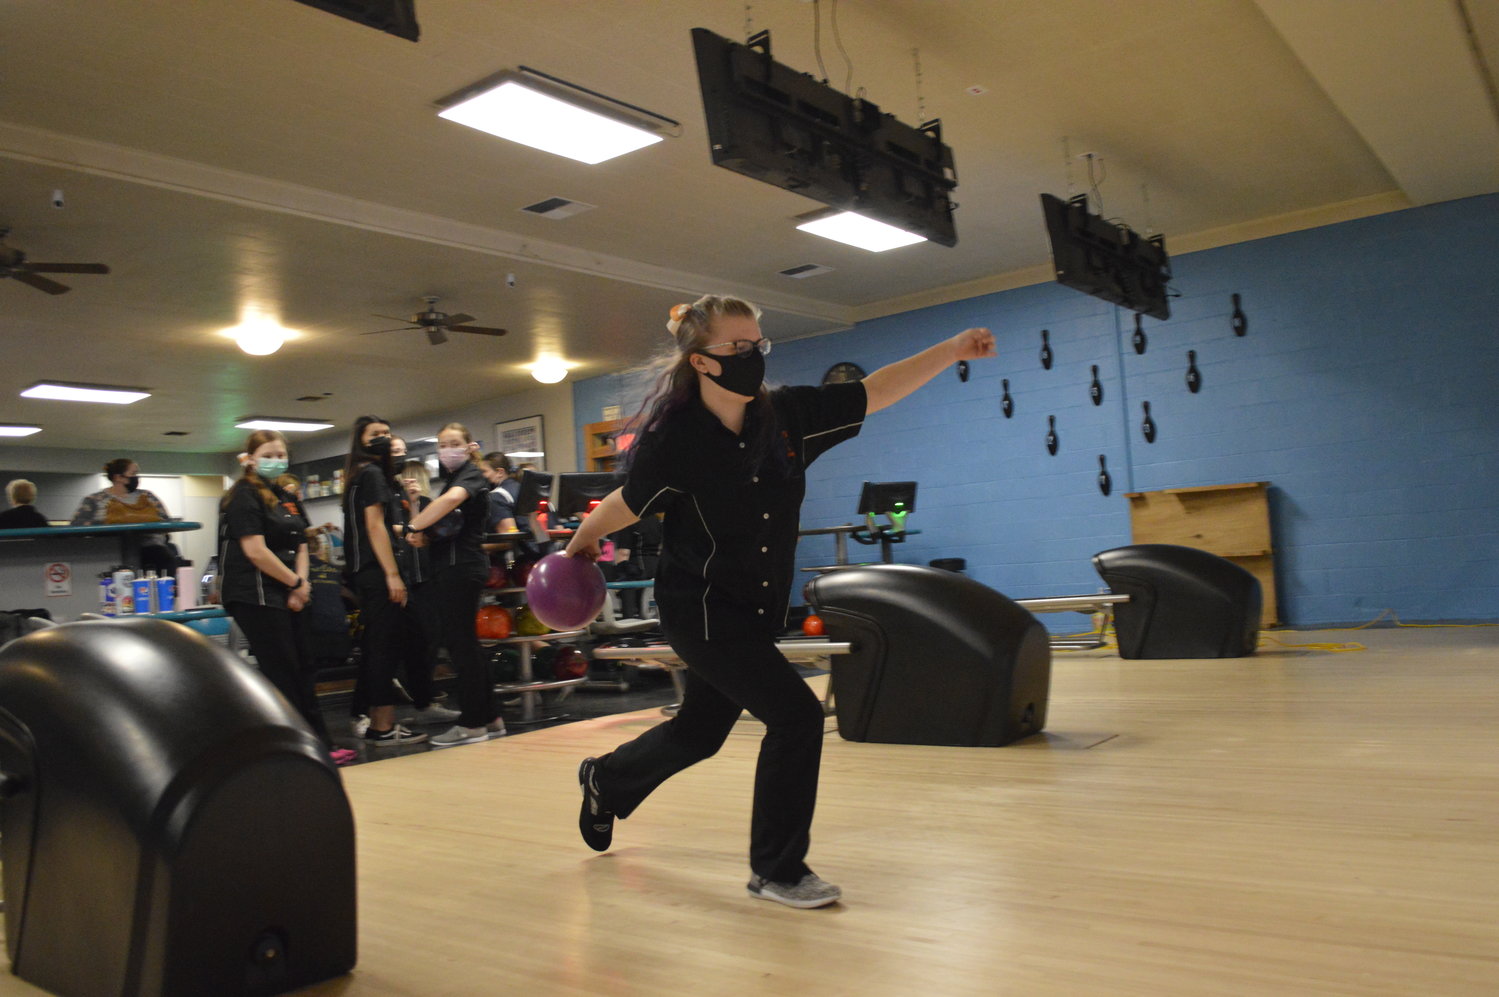 Sydney Wheaton is pictured making a shot in bowling as her team looks on.